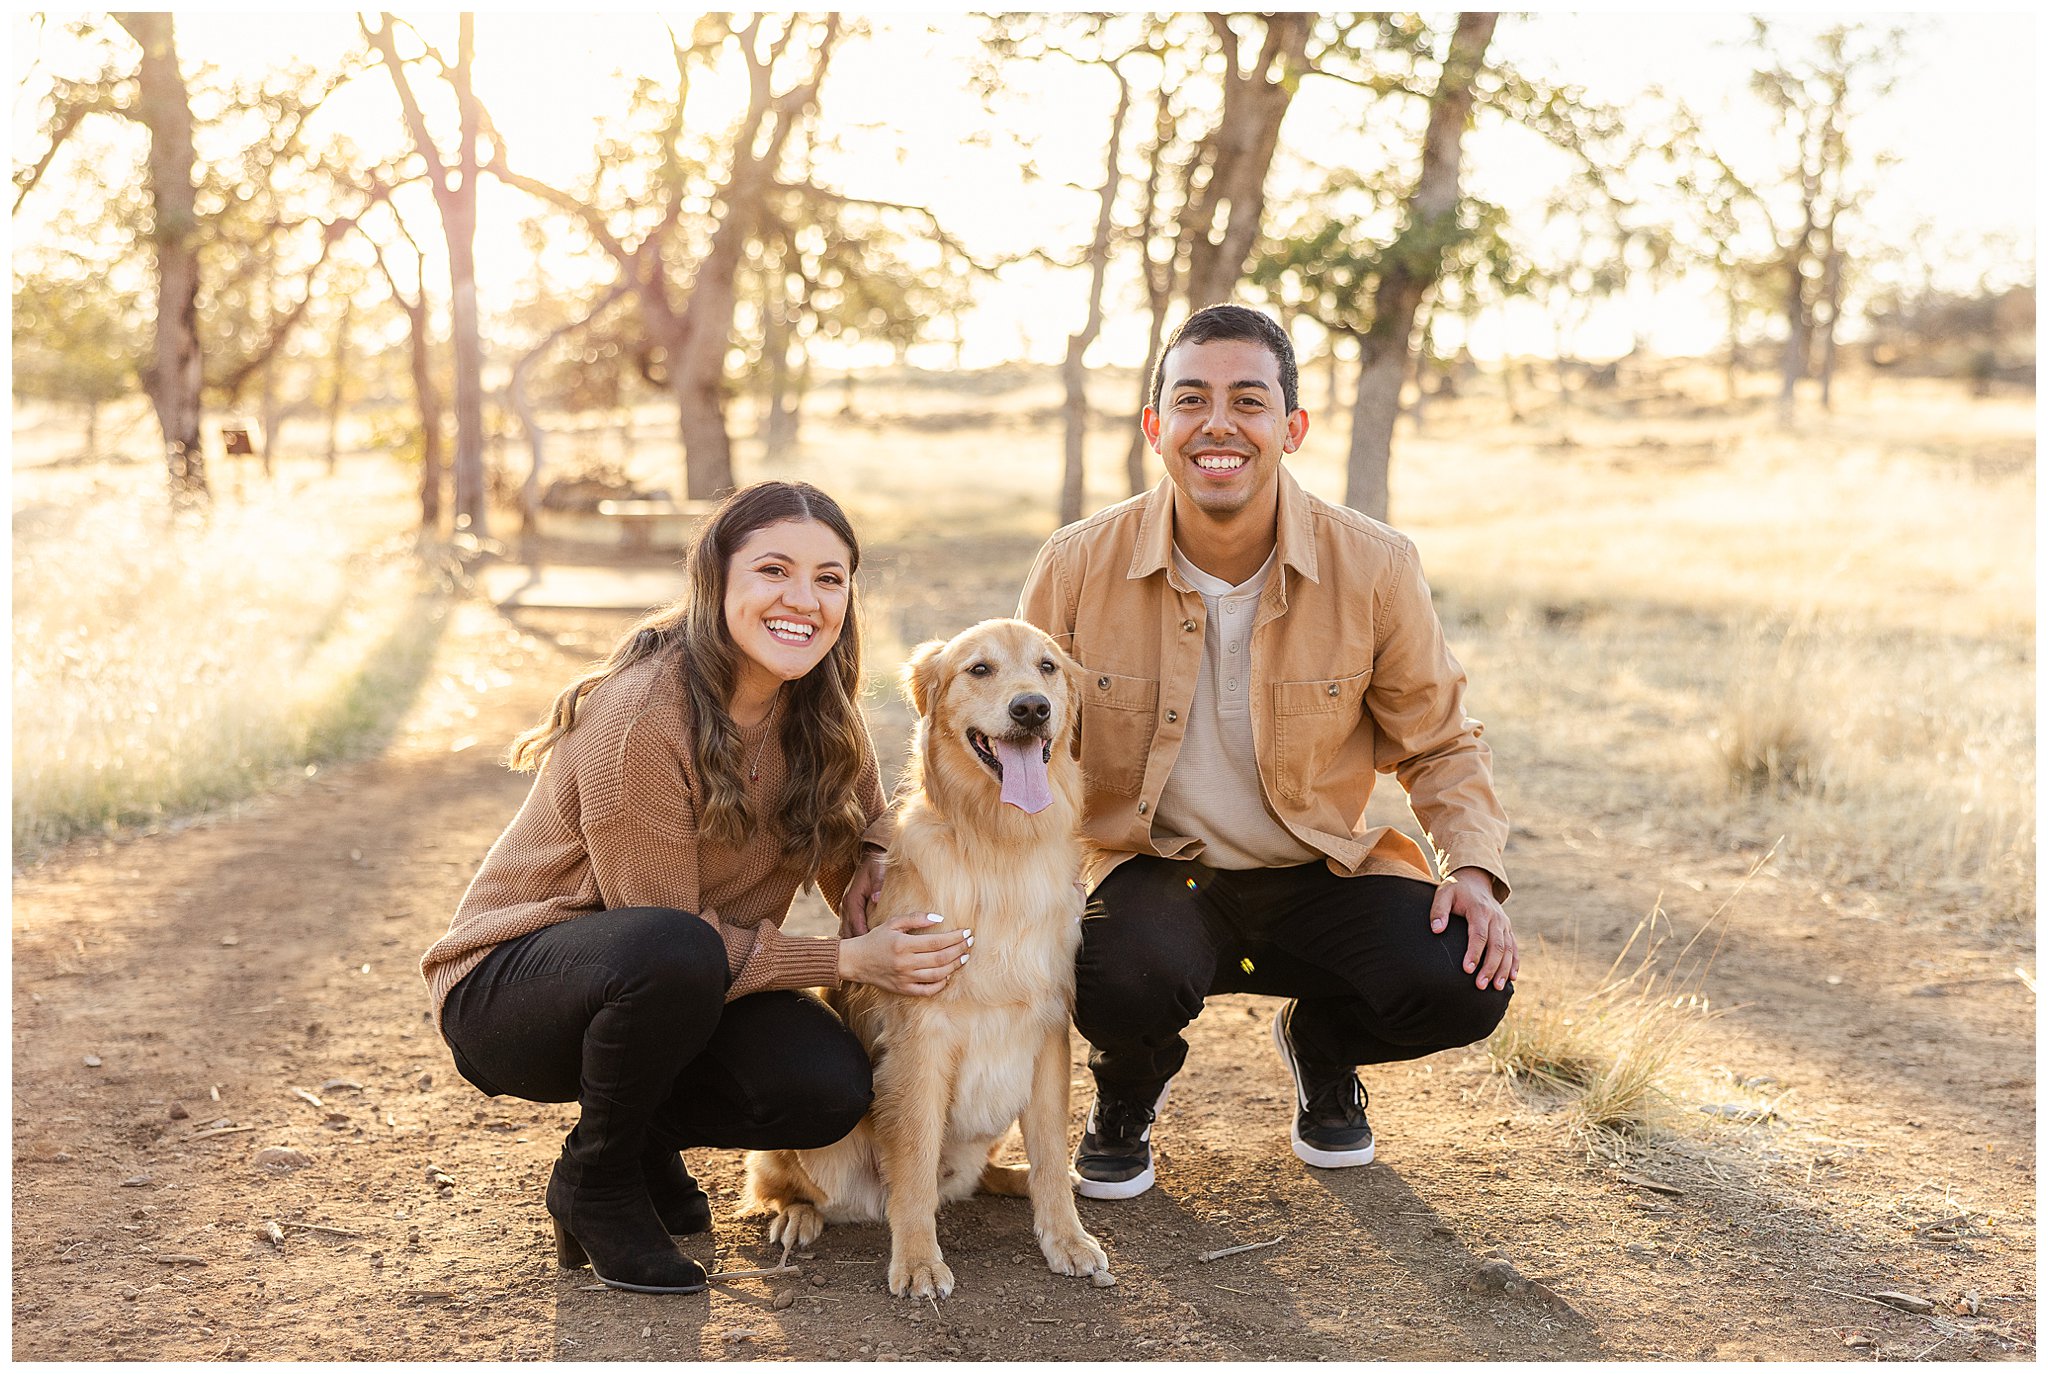 Peregrine Point Disc Golf Course Chico CA Bidwell Park Dog Golden Retriever Sweater Pink Dress Canyon Engagement Ring,